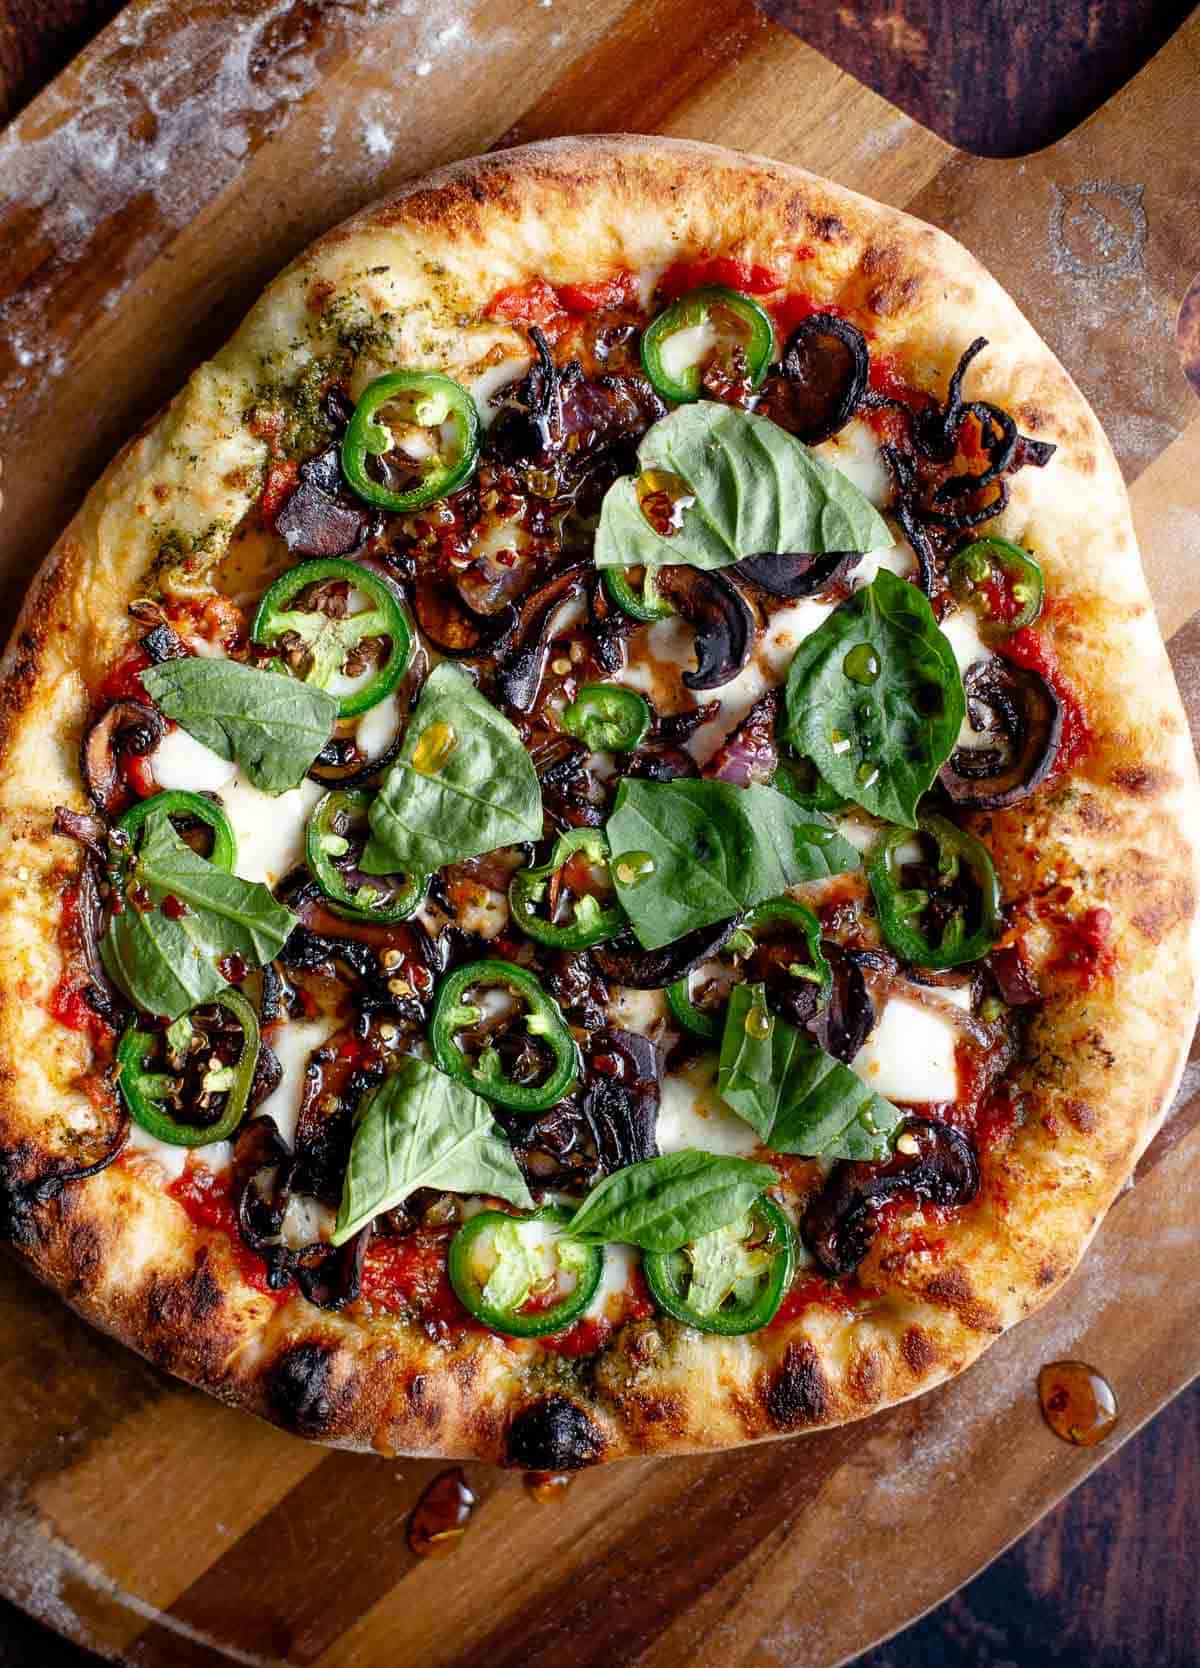 Veggie pizza with mushrooms  and caramelized onions.